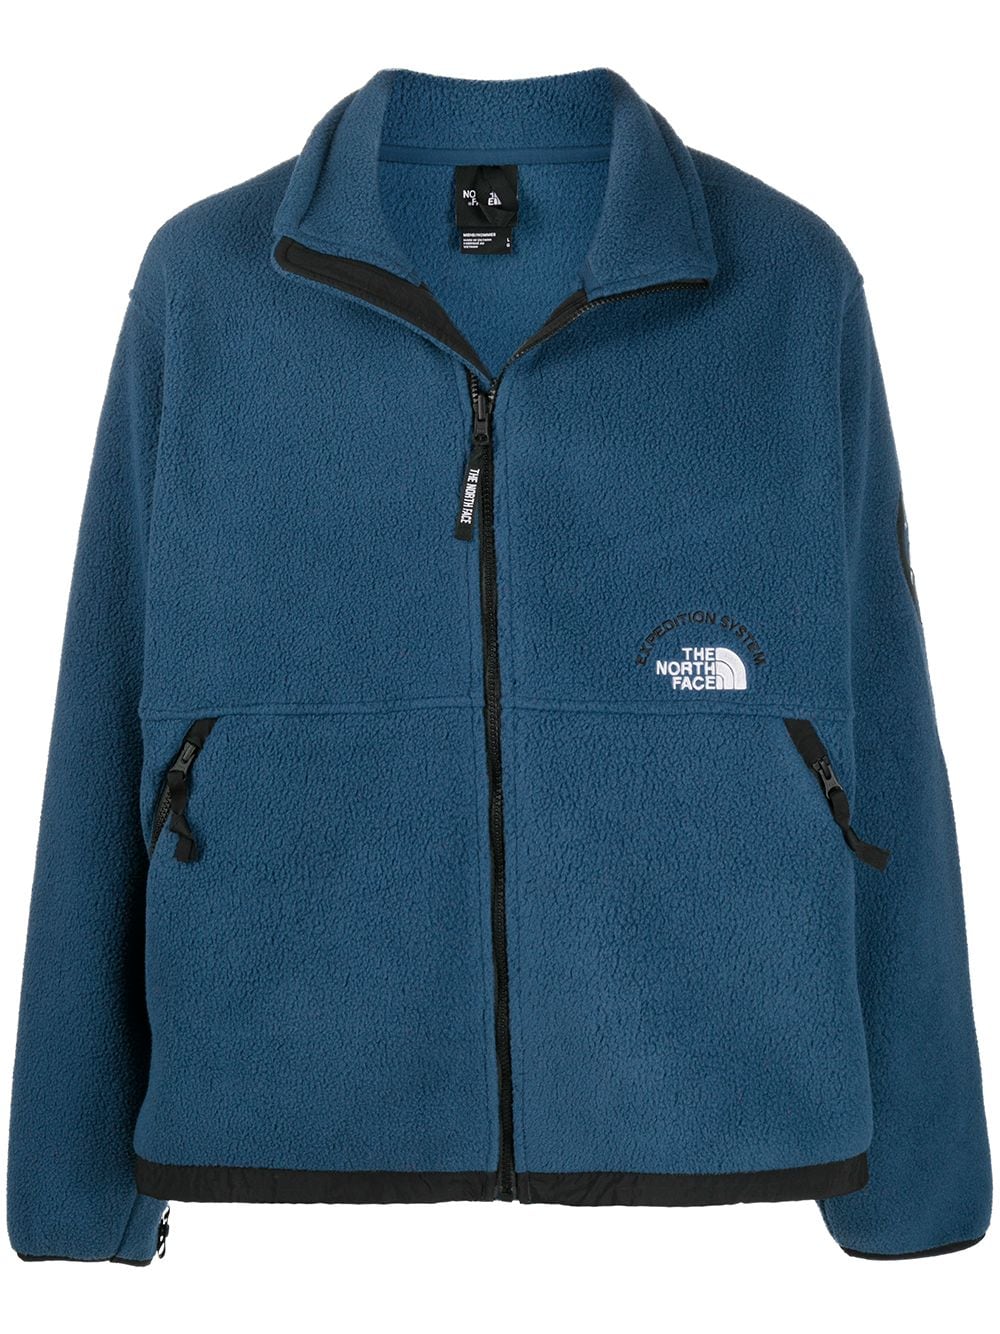 The North Face NSE Pumori Expedition Jacket